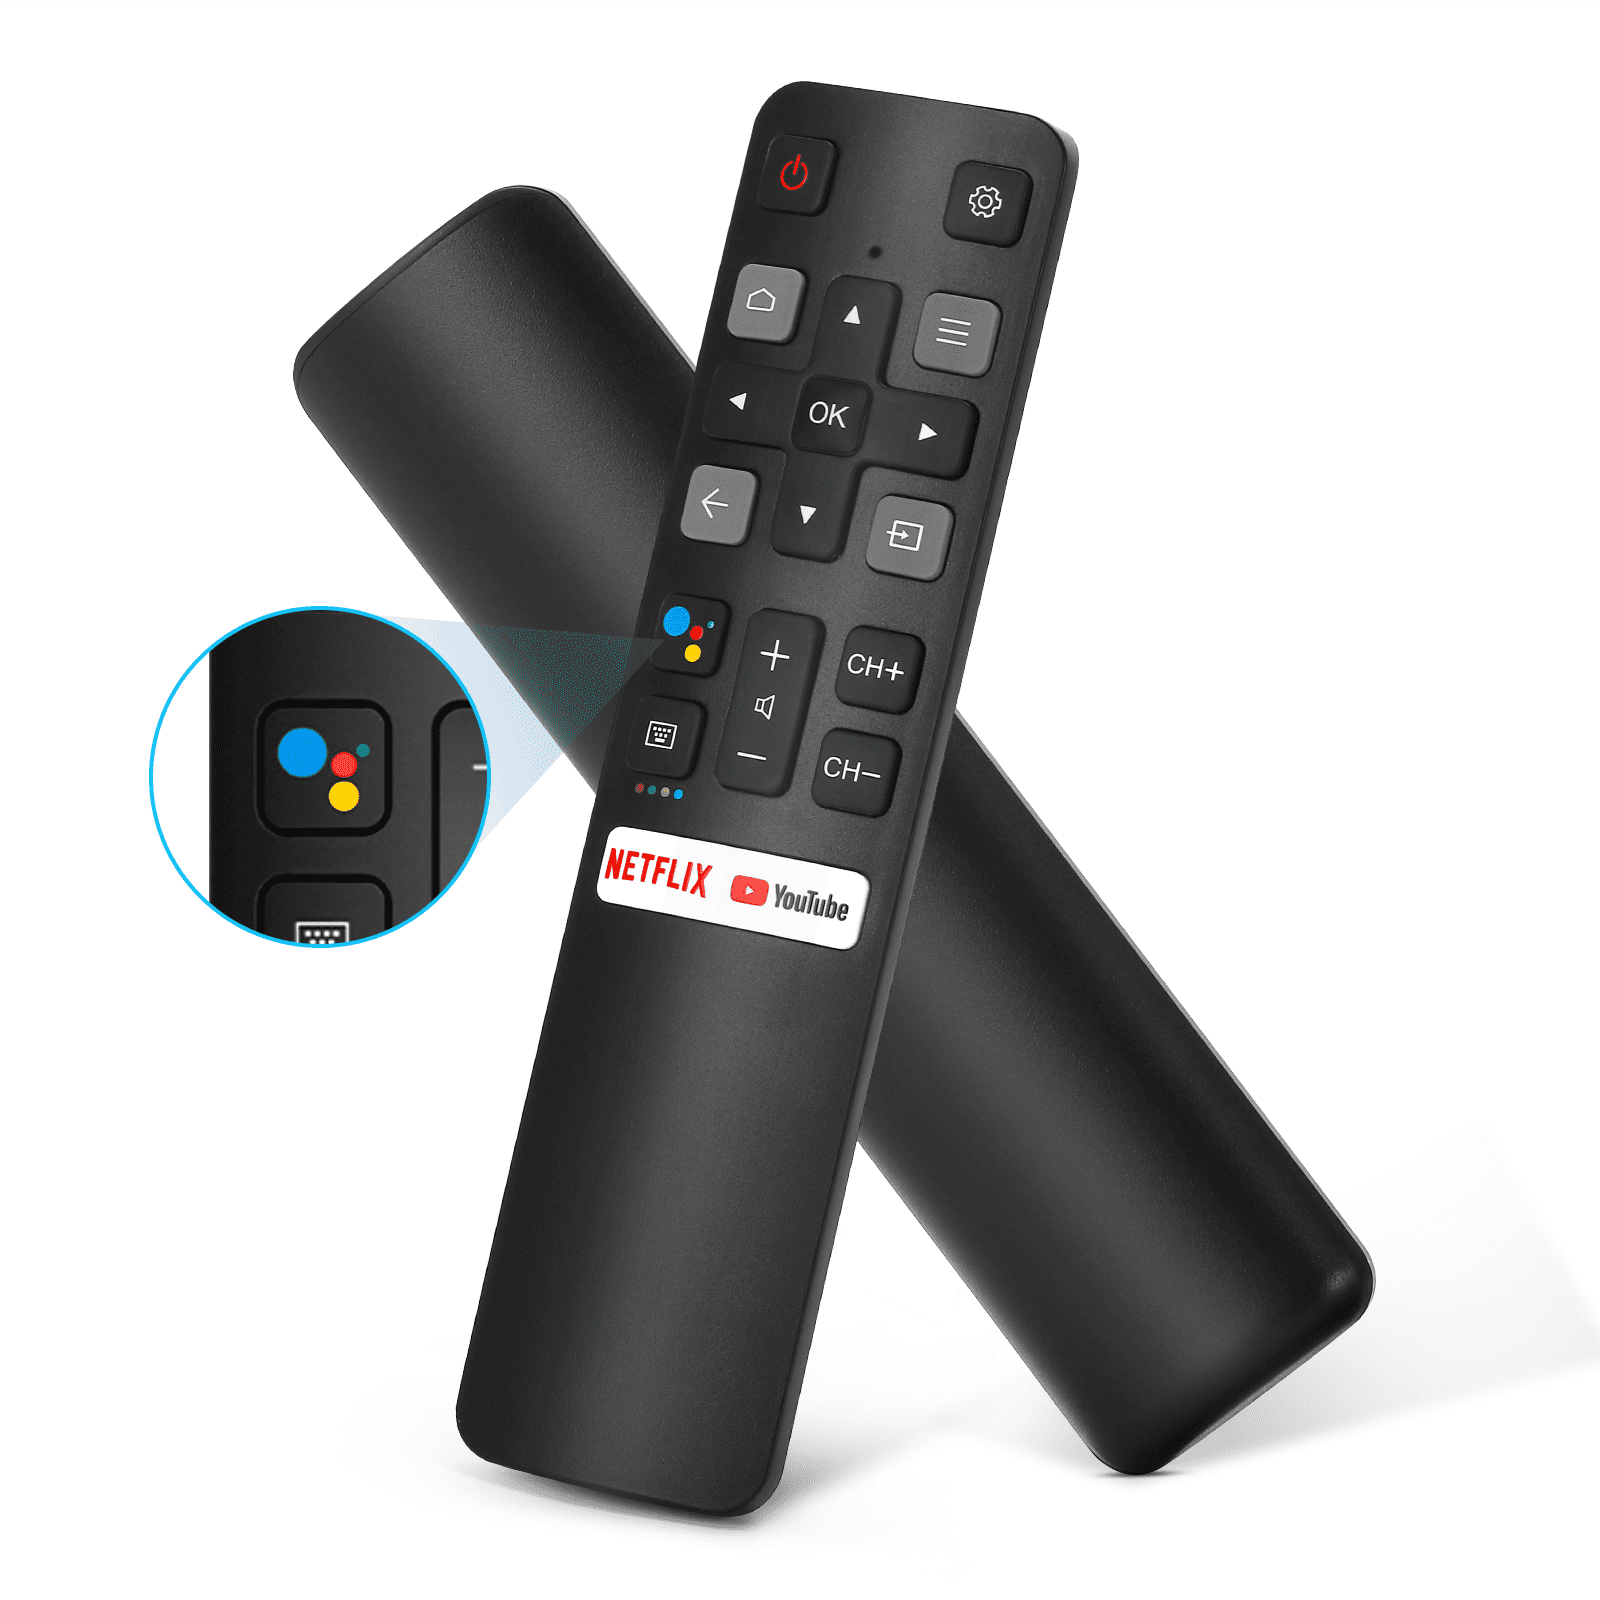 RC802V Replaced Voice Remote For TCL Android TV Model 50P8M(50D6